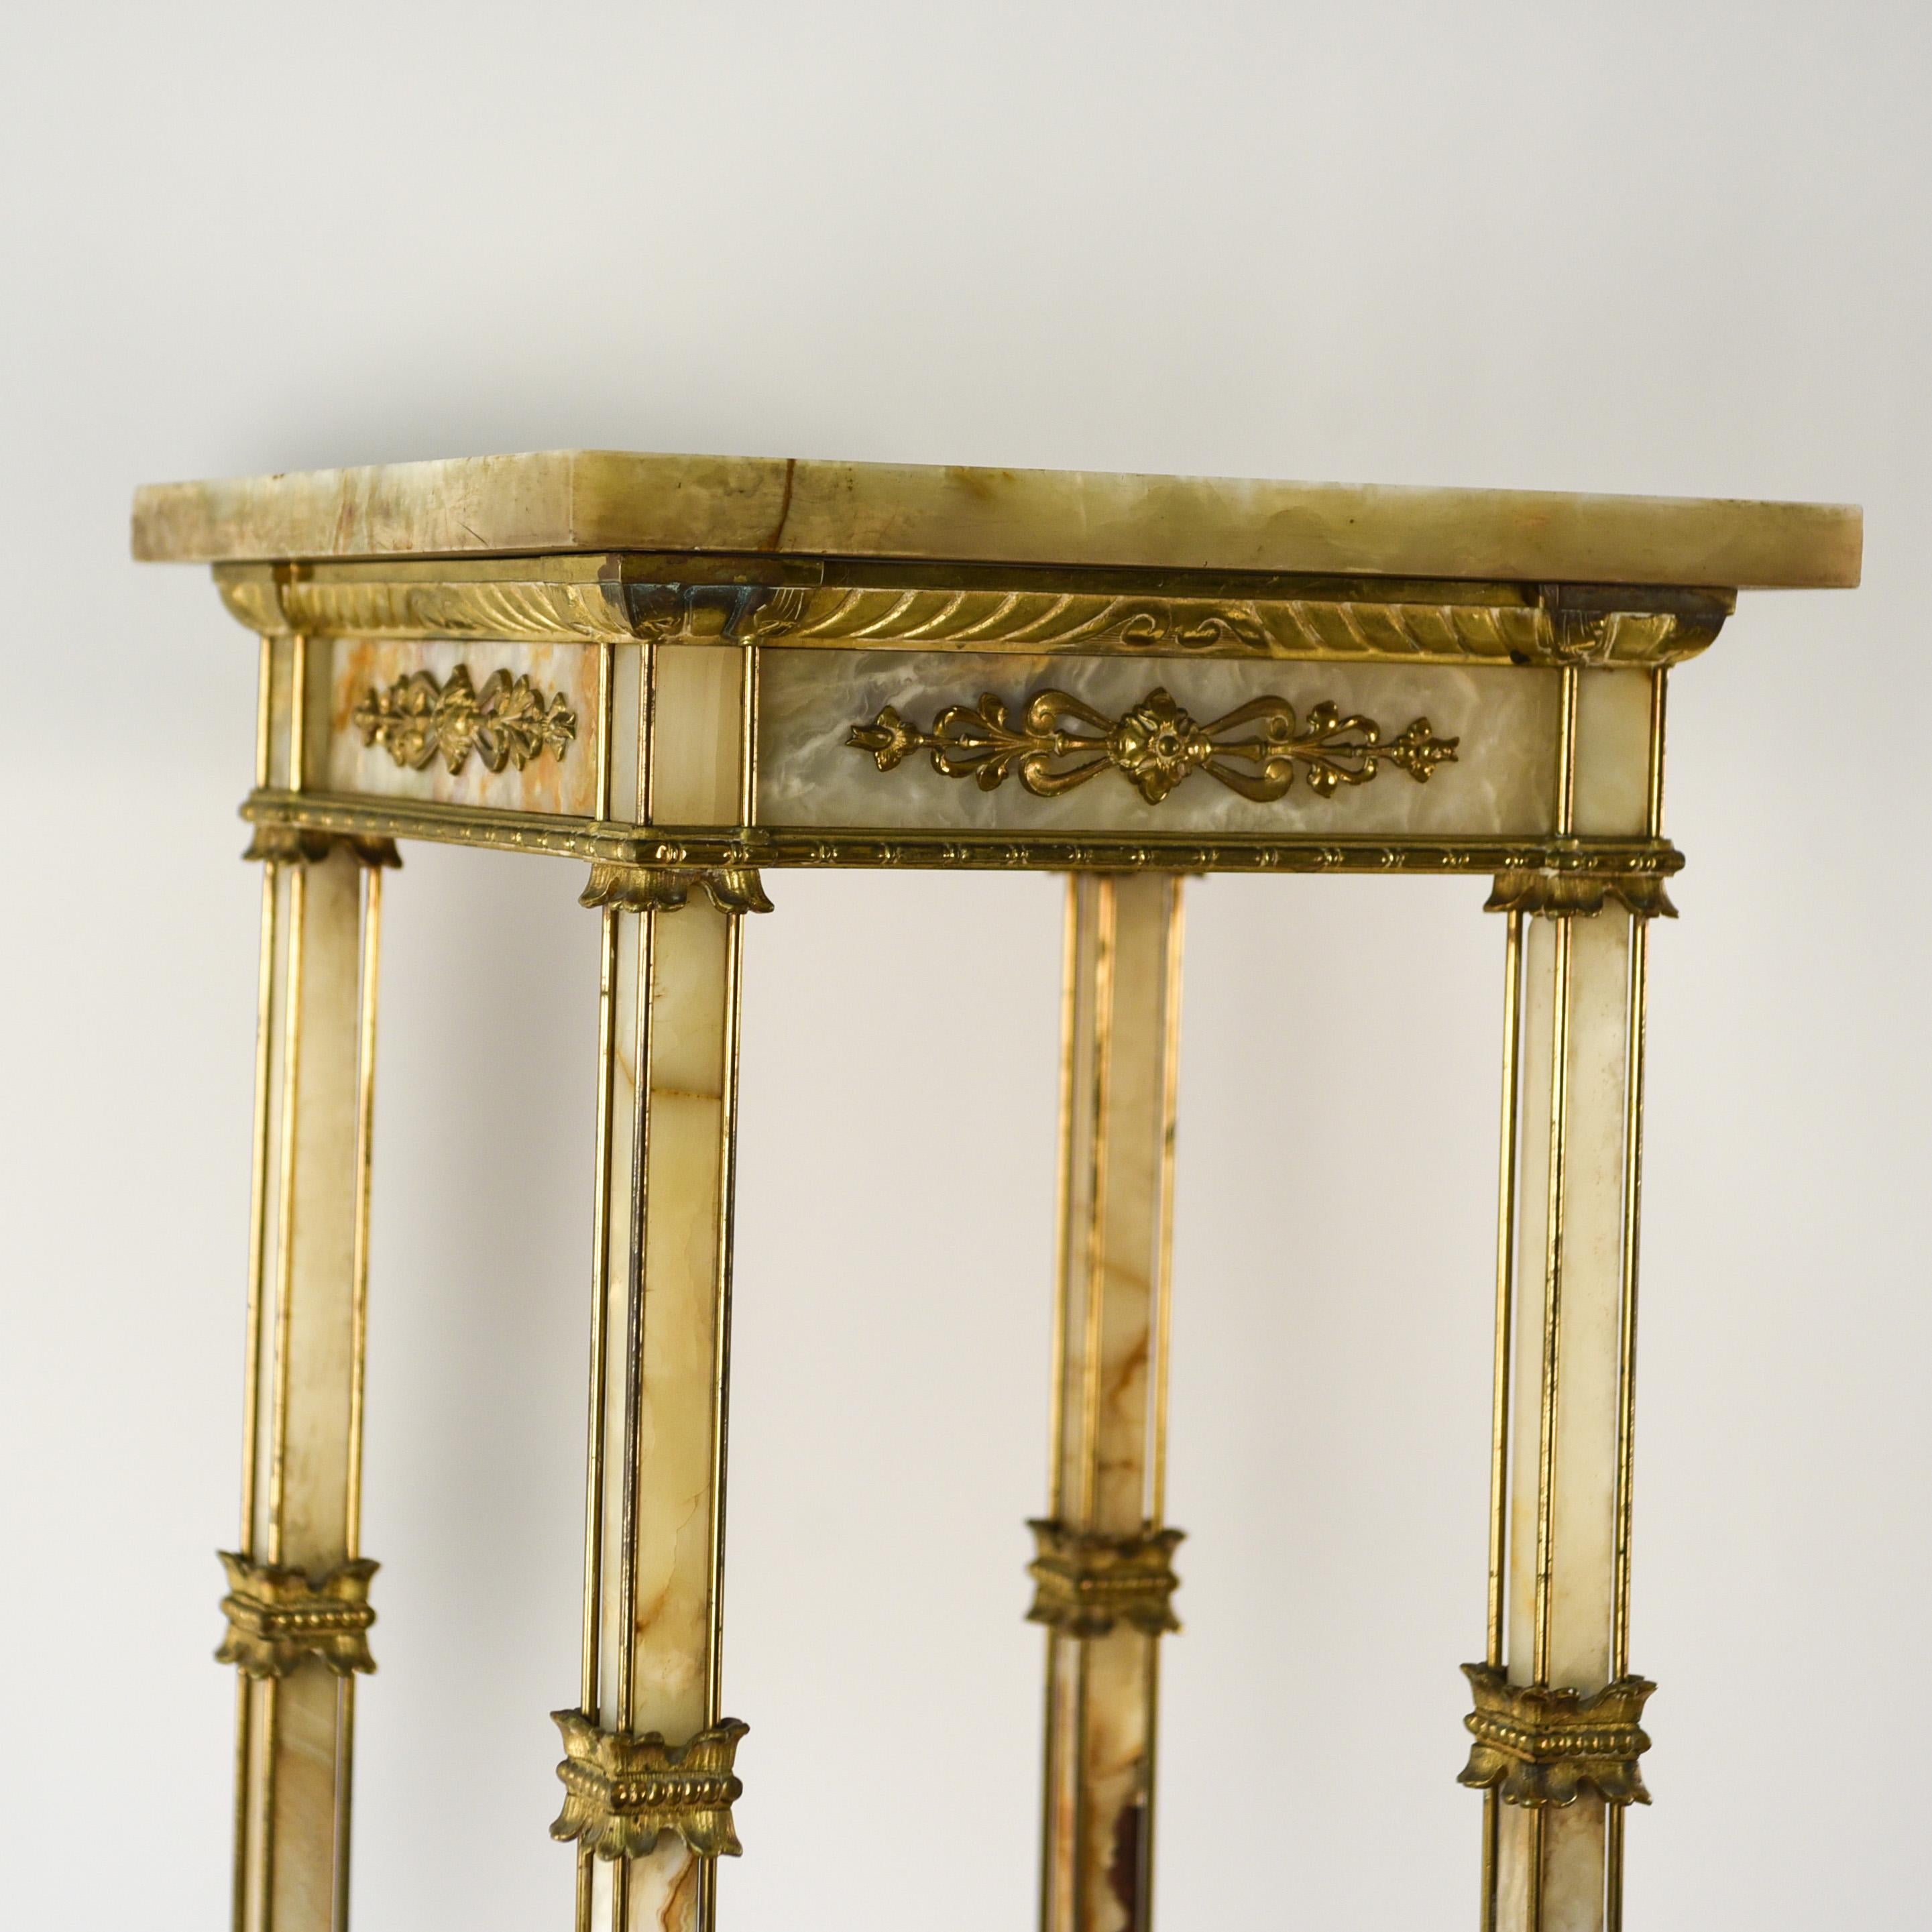 This antique ornate brass and marble pedestal provides a wonderful stand to place a special piece upon. With beautiful brass ornaments, this pedestal can also stand alone as a decorative piece in an interior.